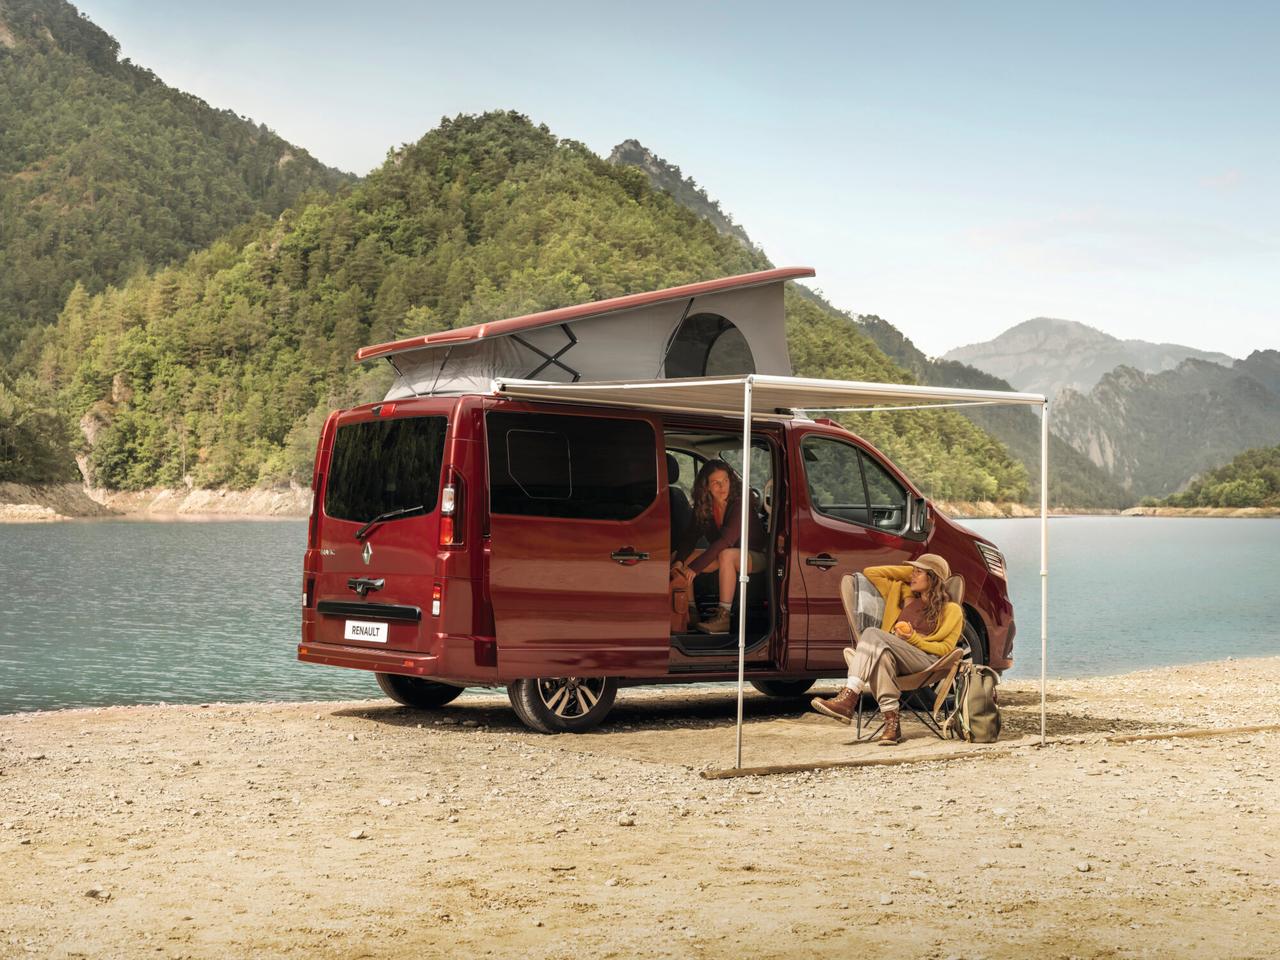 The Renault SpaceNomad includes a retractable awning